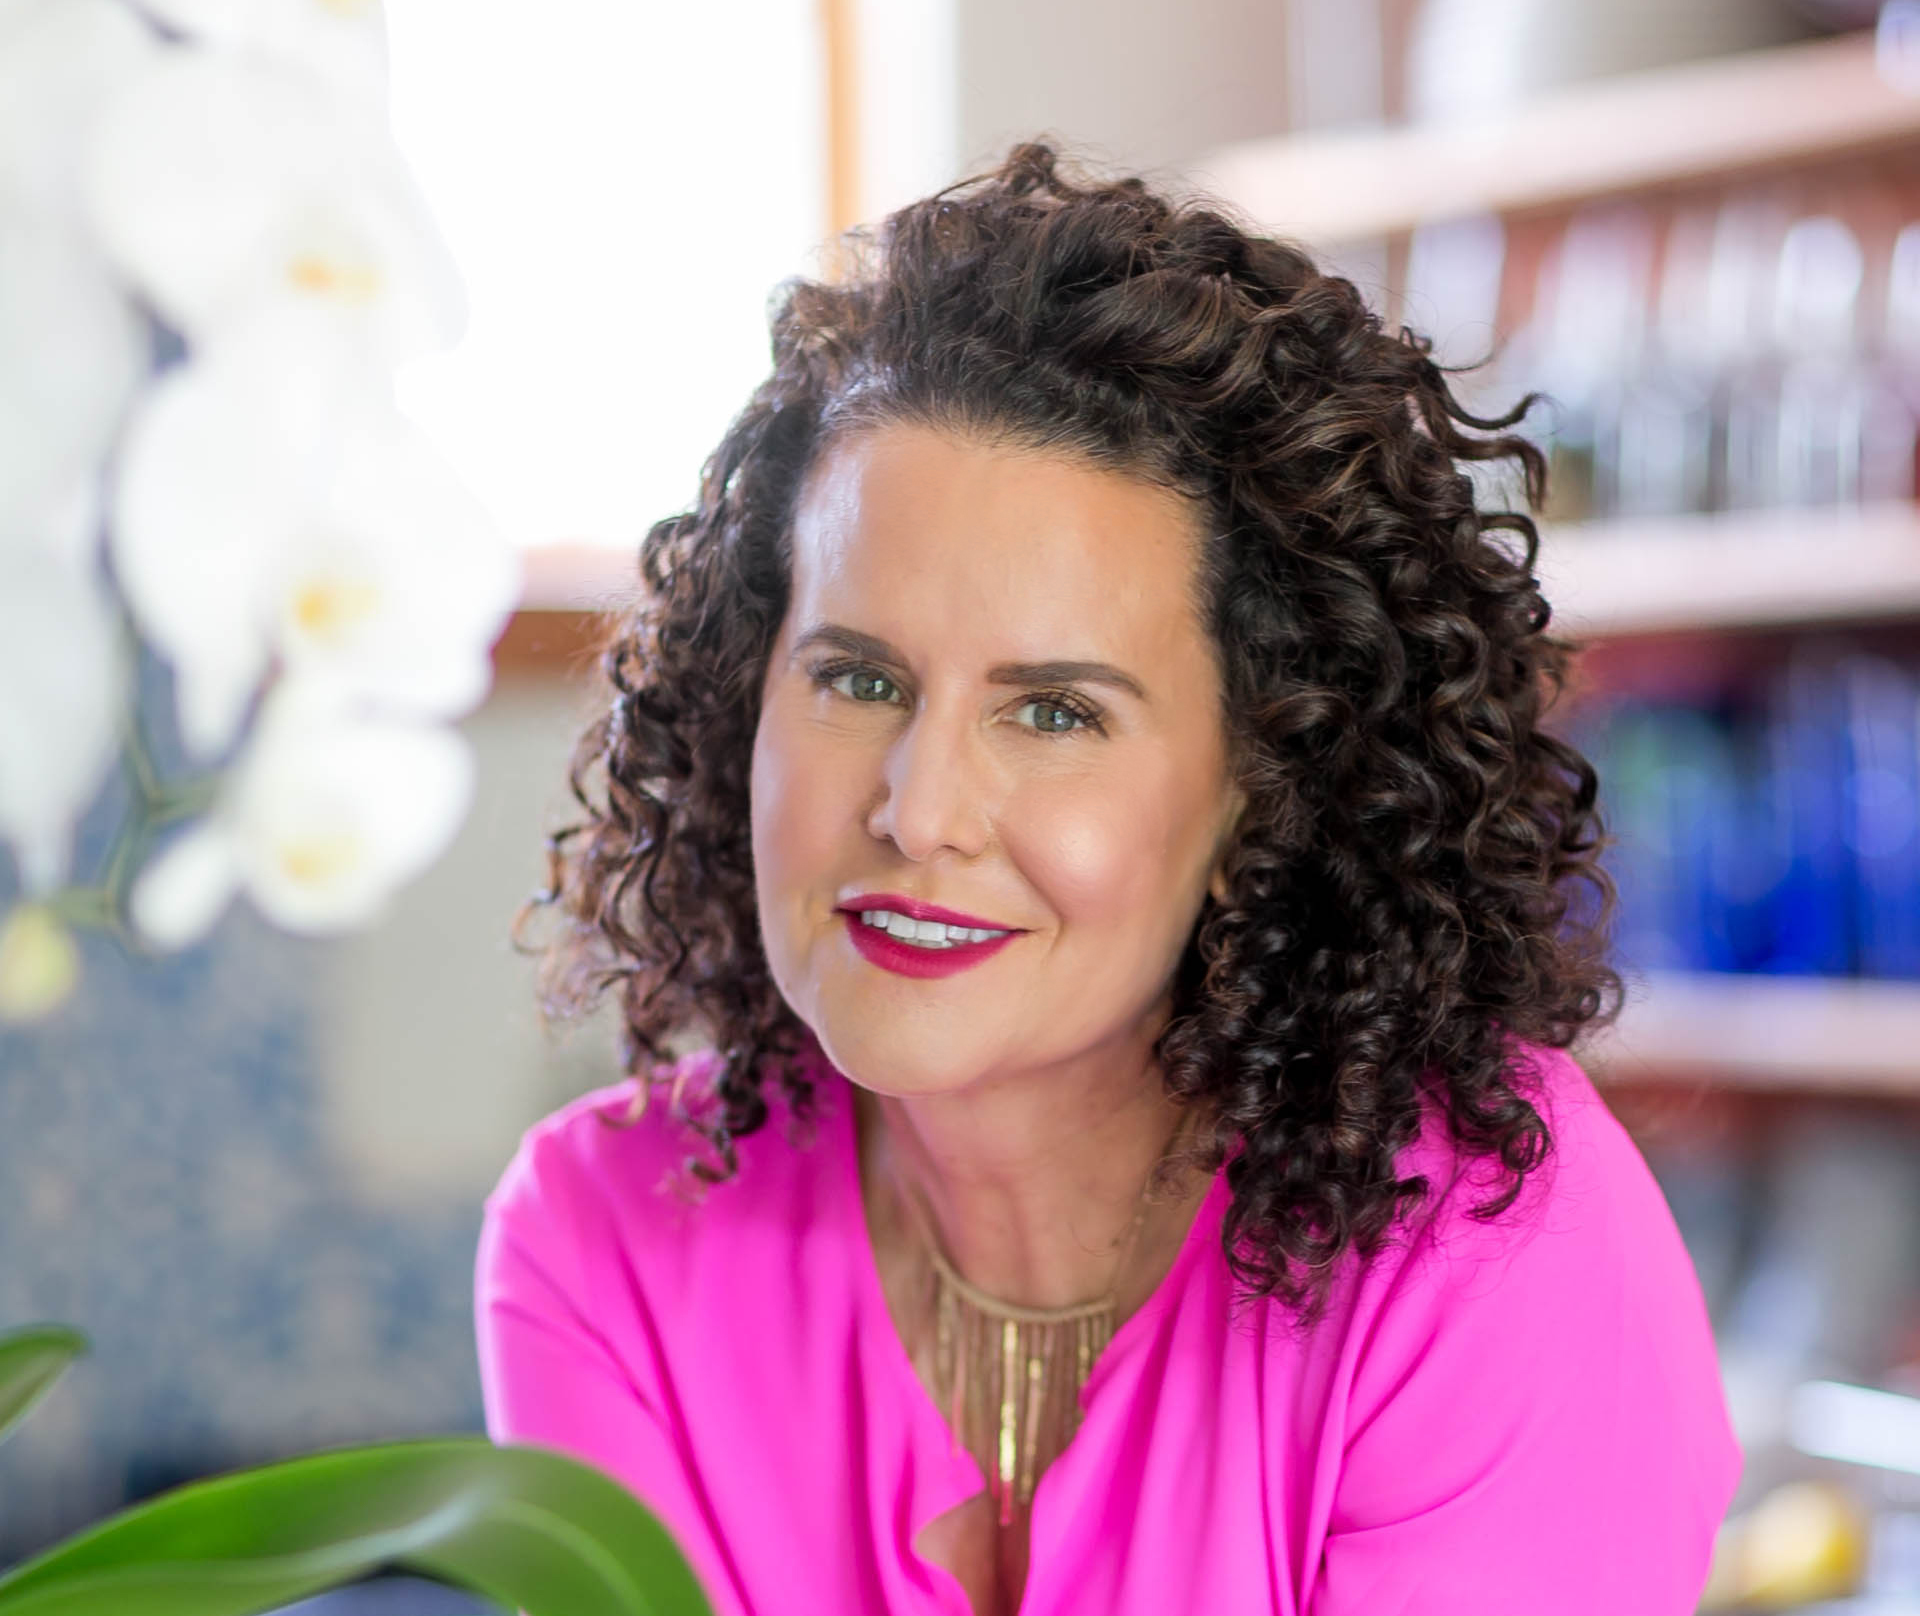 naturally curly founder michelle breyer poses with her dark, curly hair in a hot pink top